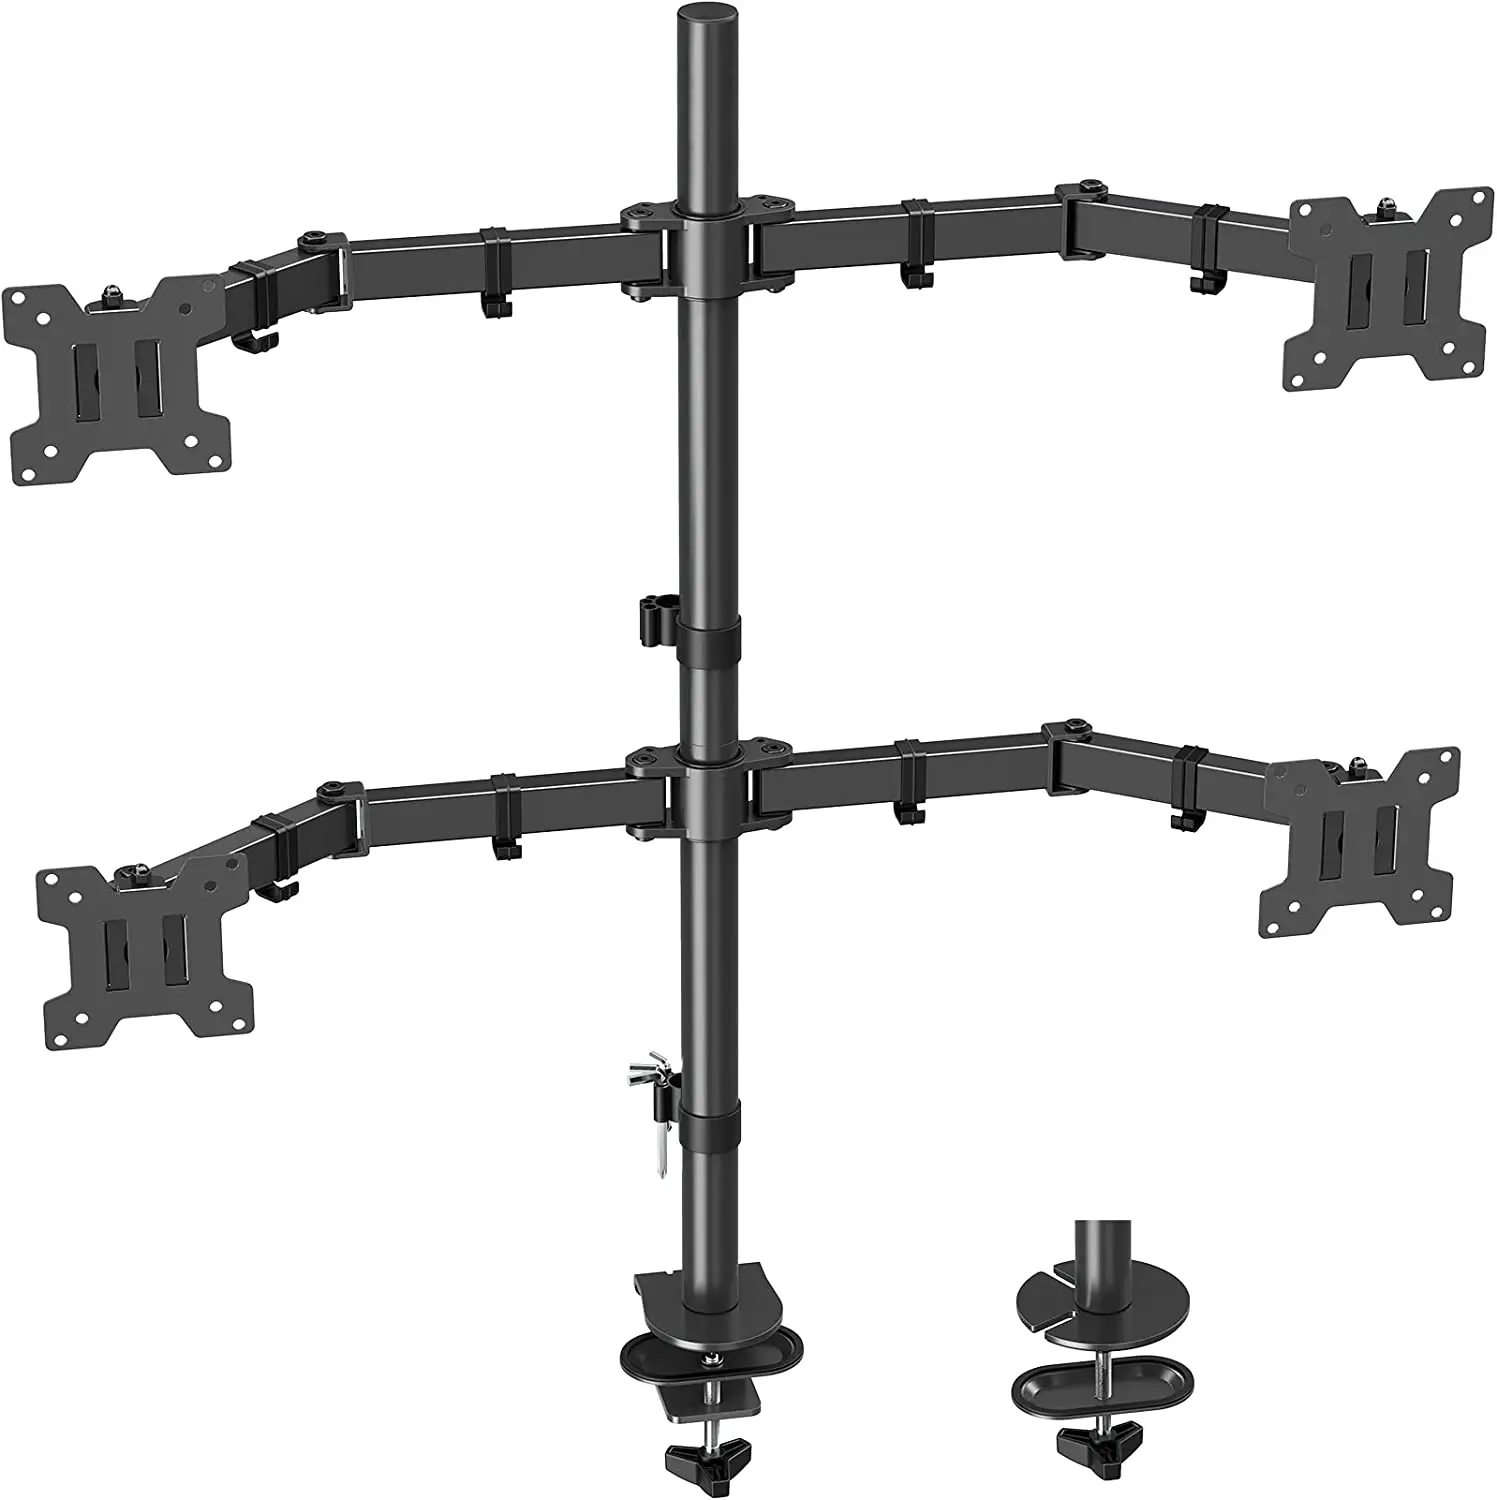 

Quad Monitor Stand, 4 Monitor Mount 13 to 27 inch Computer Screens, Hold up to 17.6lbs Each, Fully Adjustable Stacked 4 Monitor